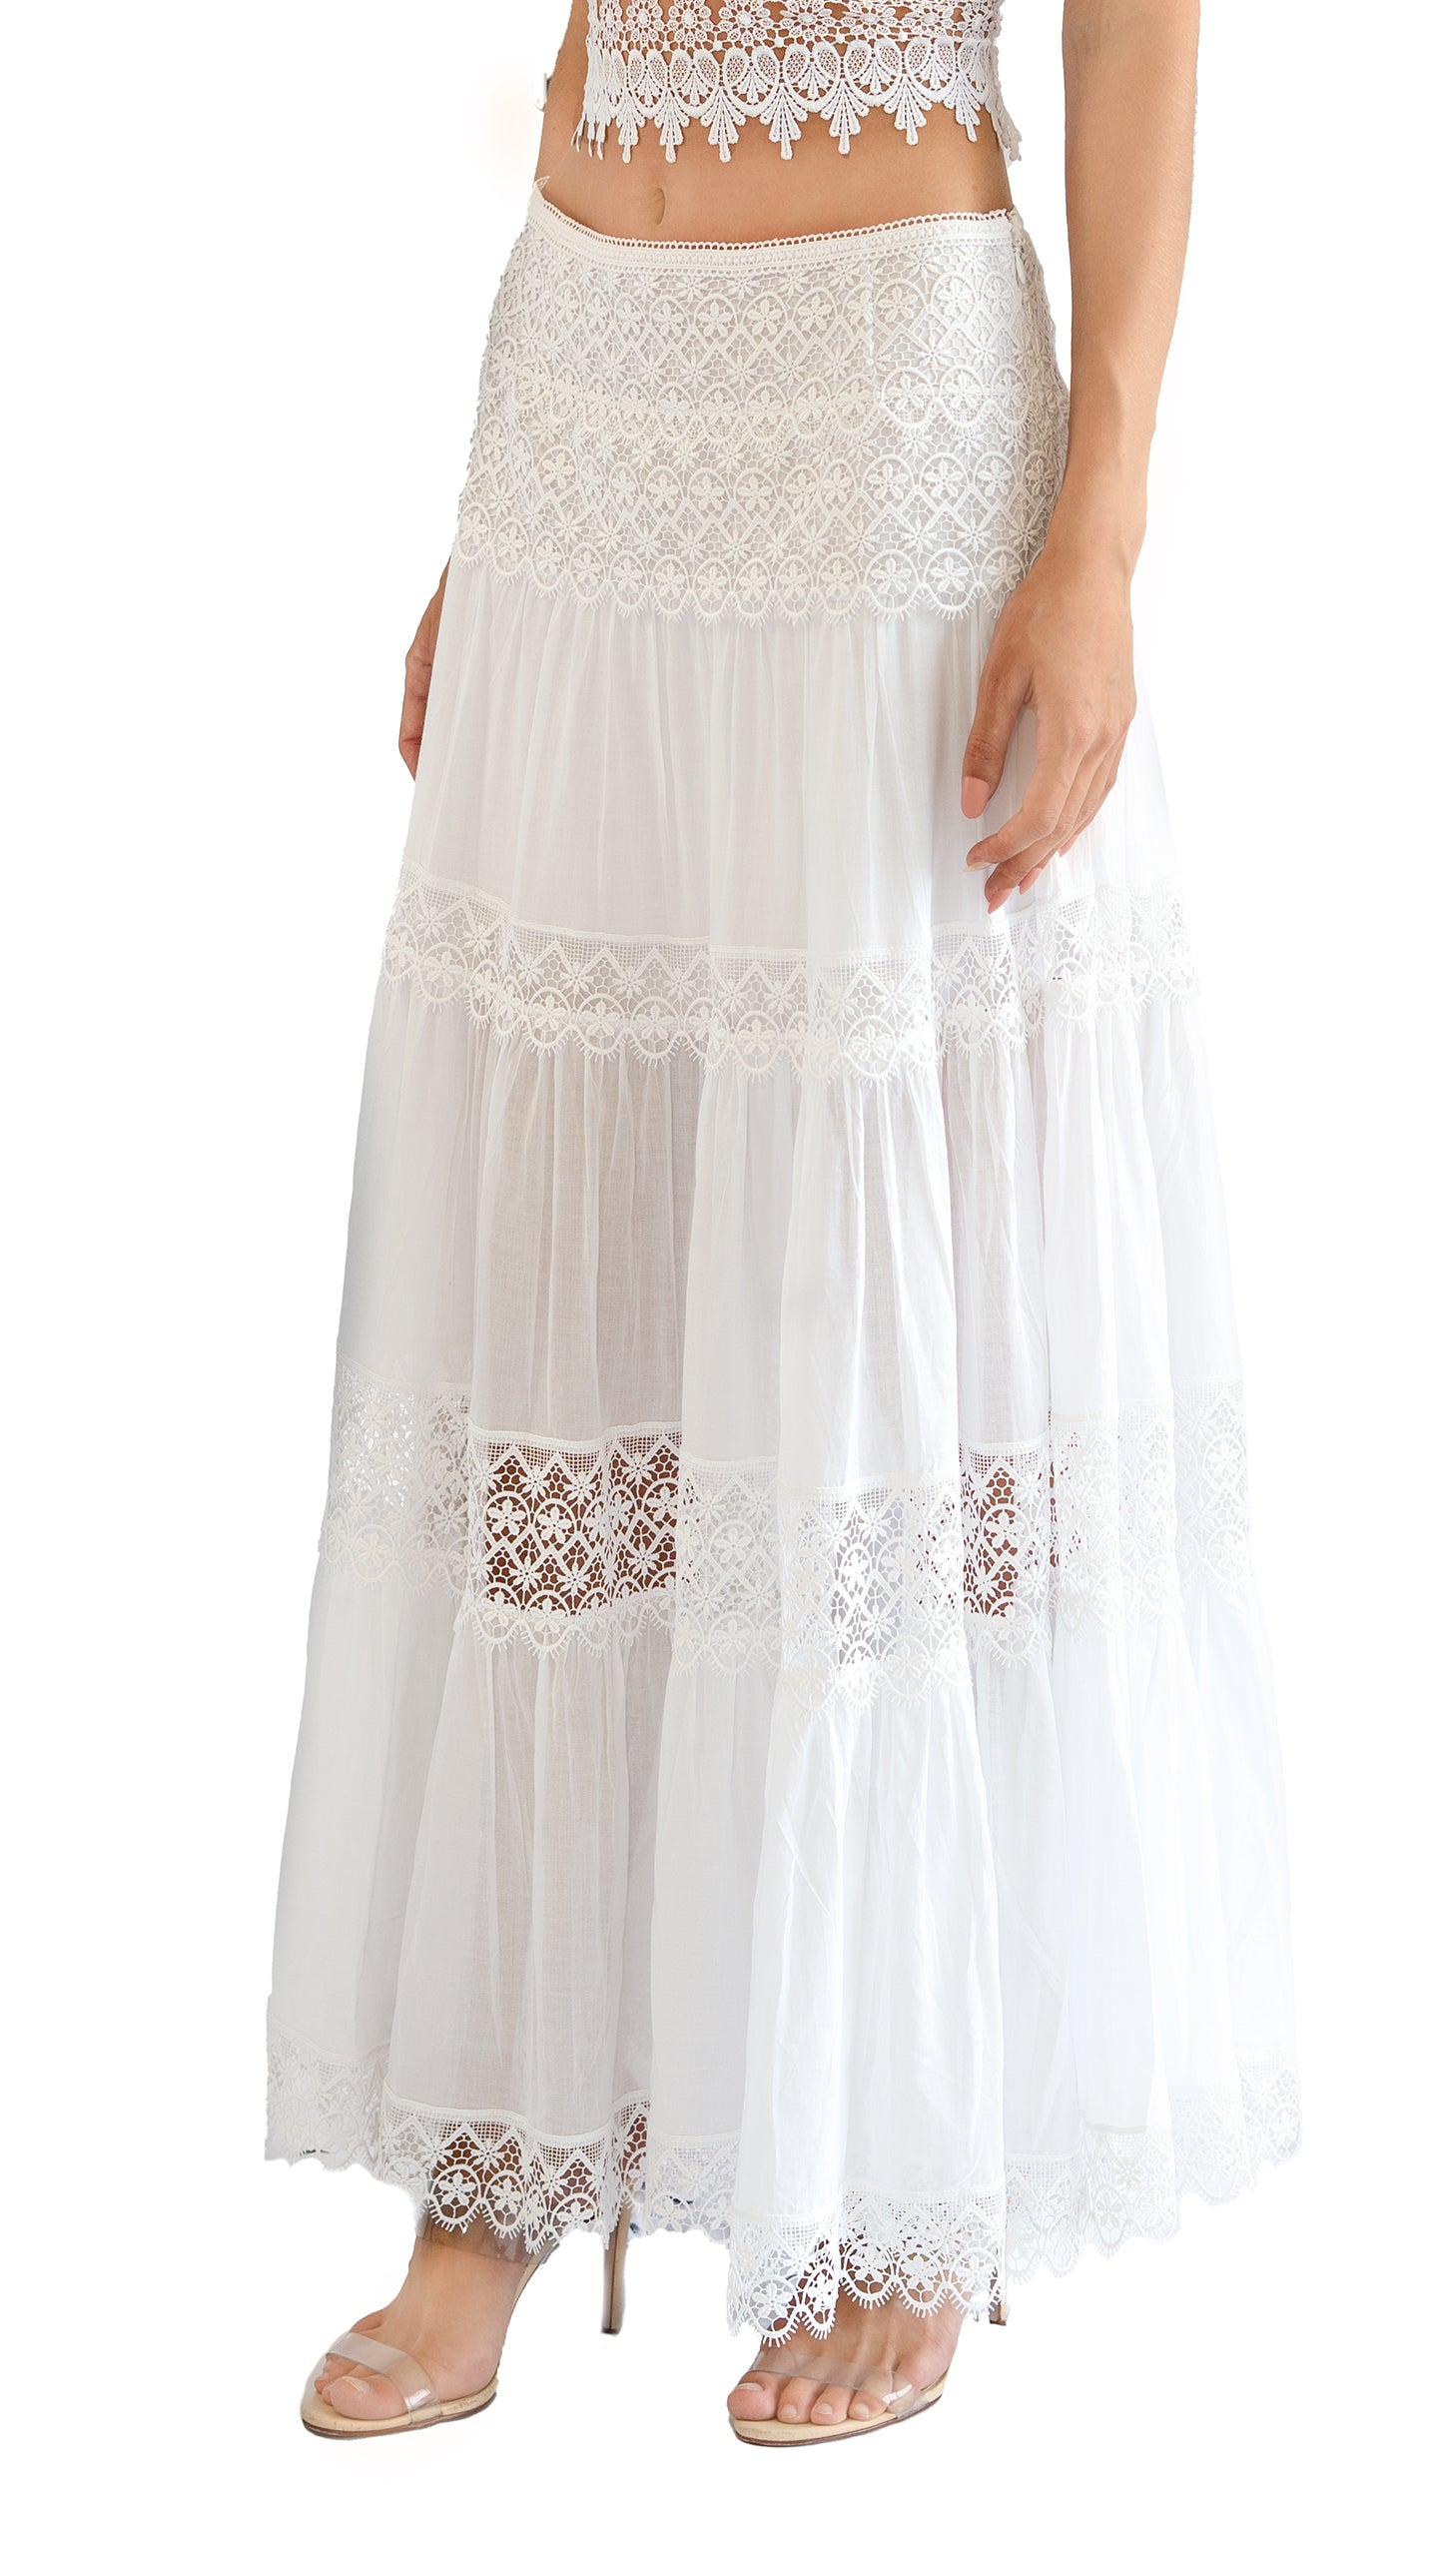 Charo Ruiz Silke long skirt with lace details in white